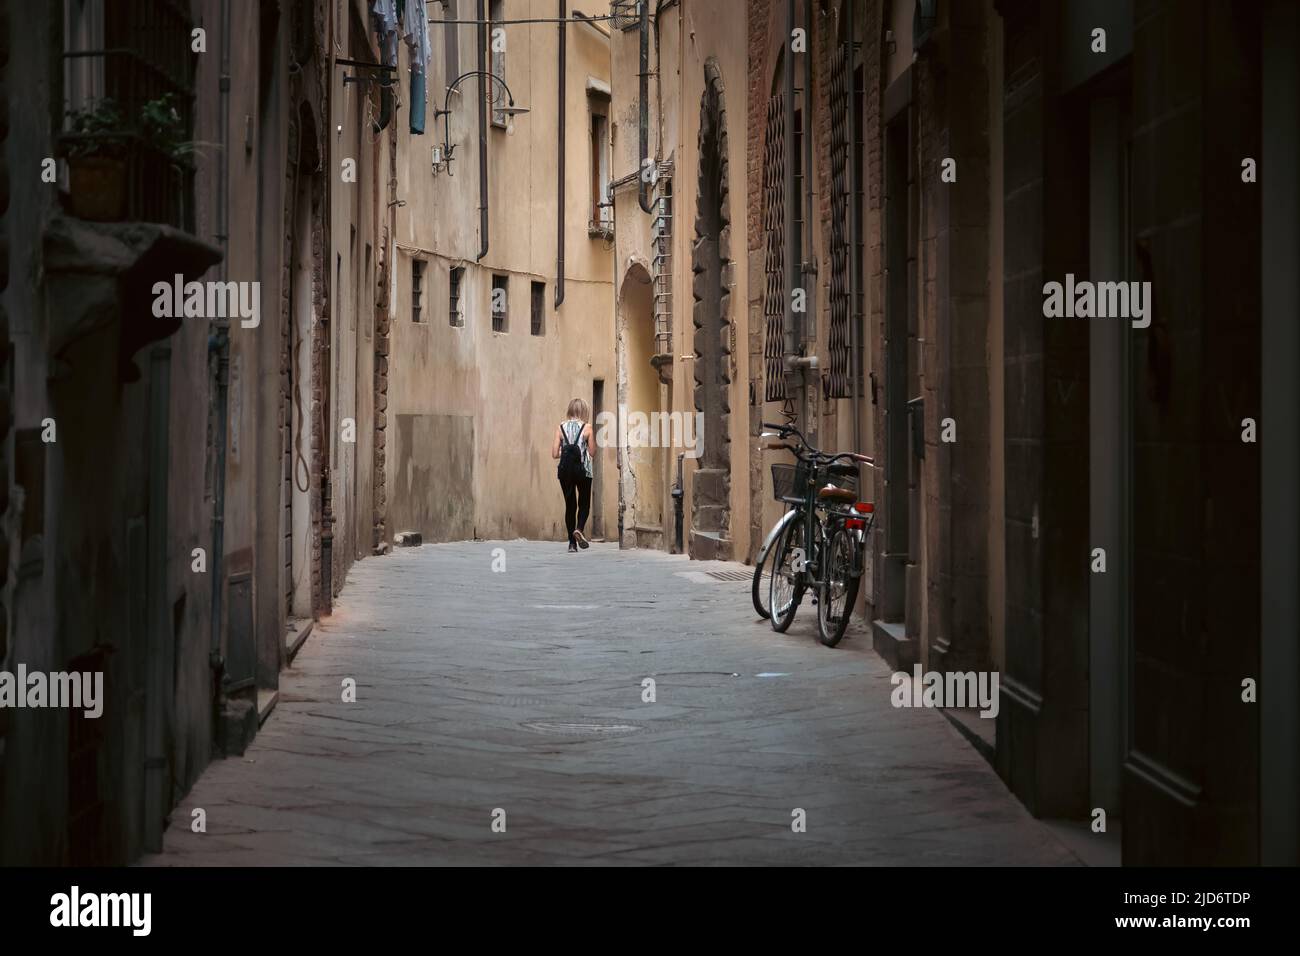 Woman walks alone in alley way in the medieval city of Lucca, Italy. Stock Photo